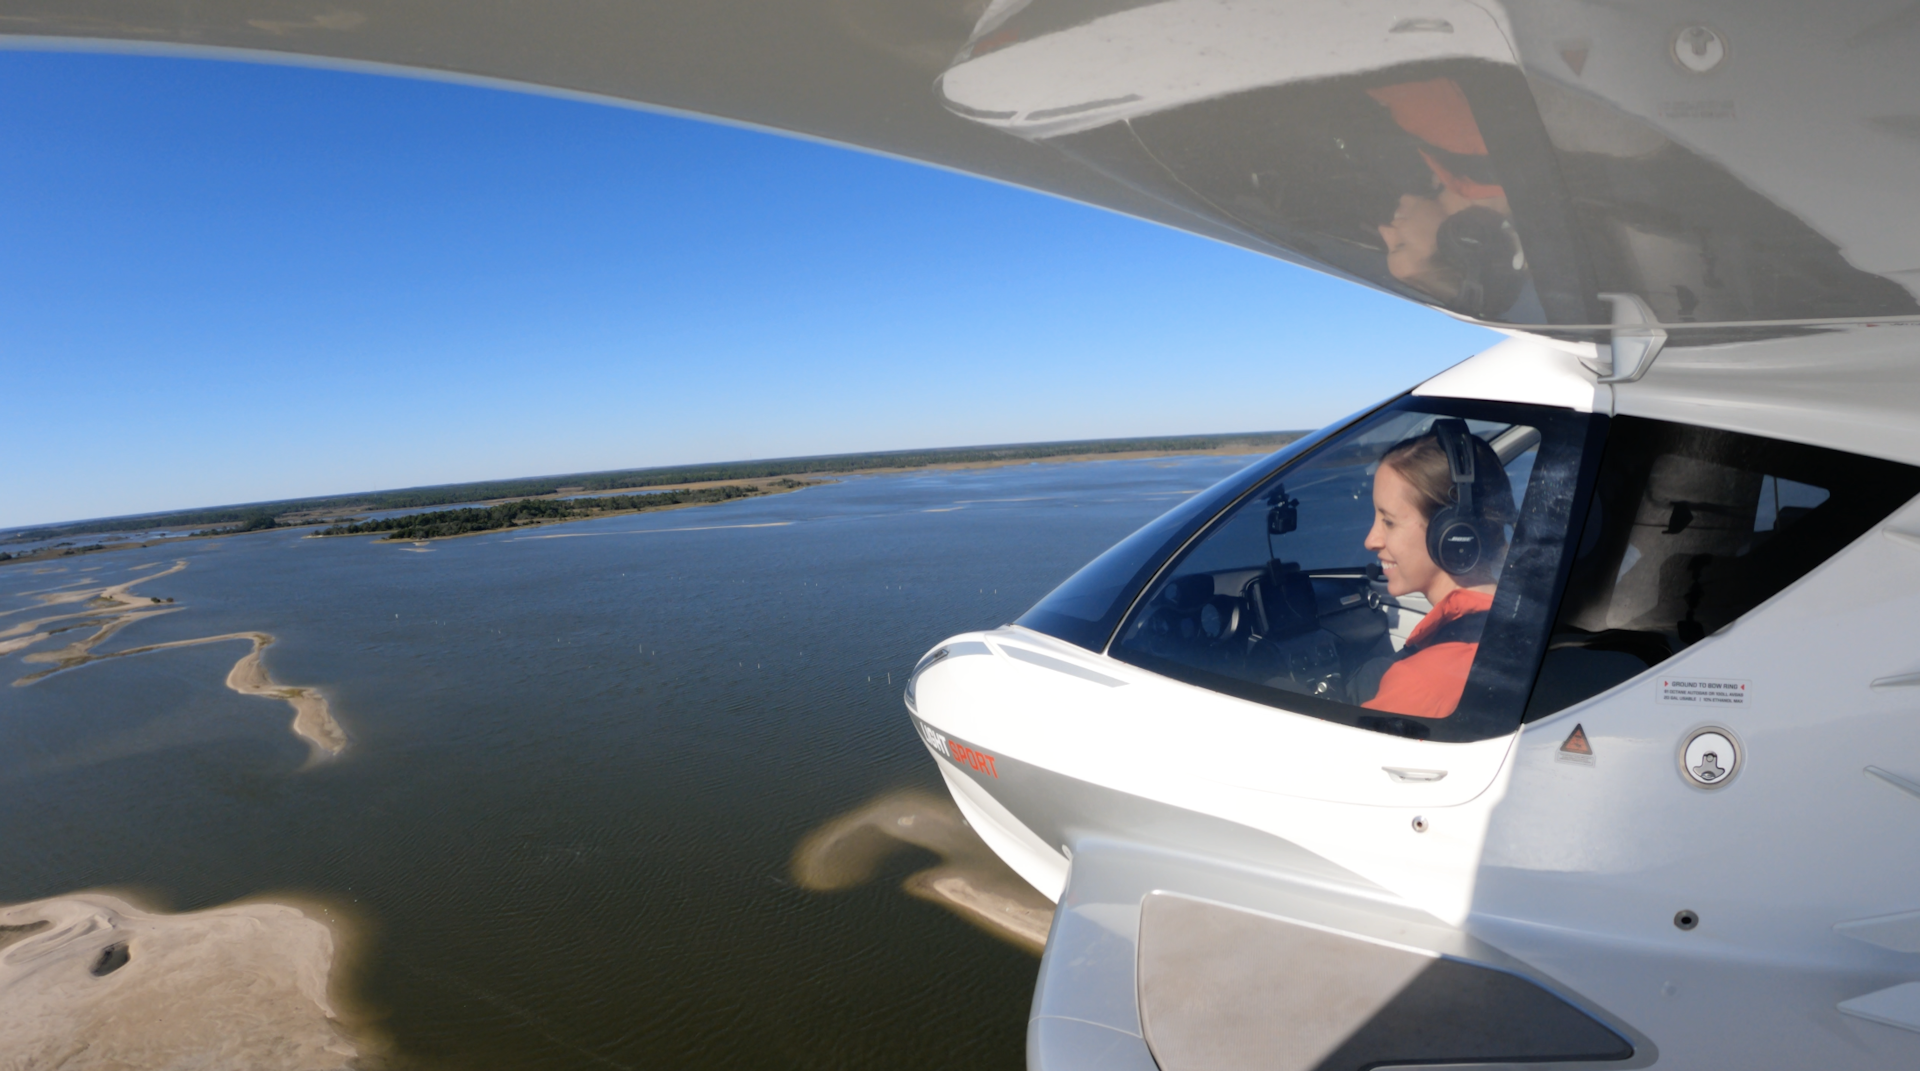 View from the wing of a small aircraft over water